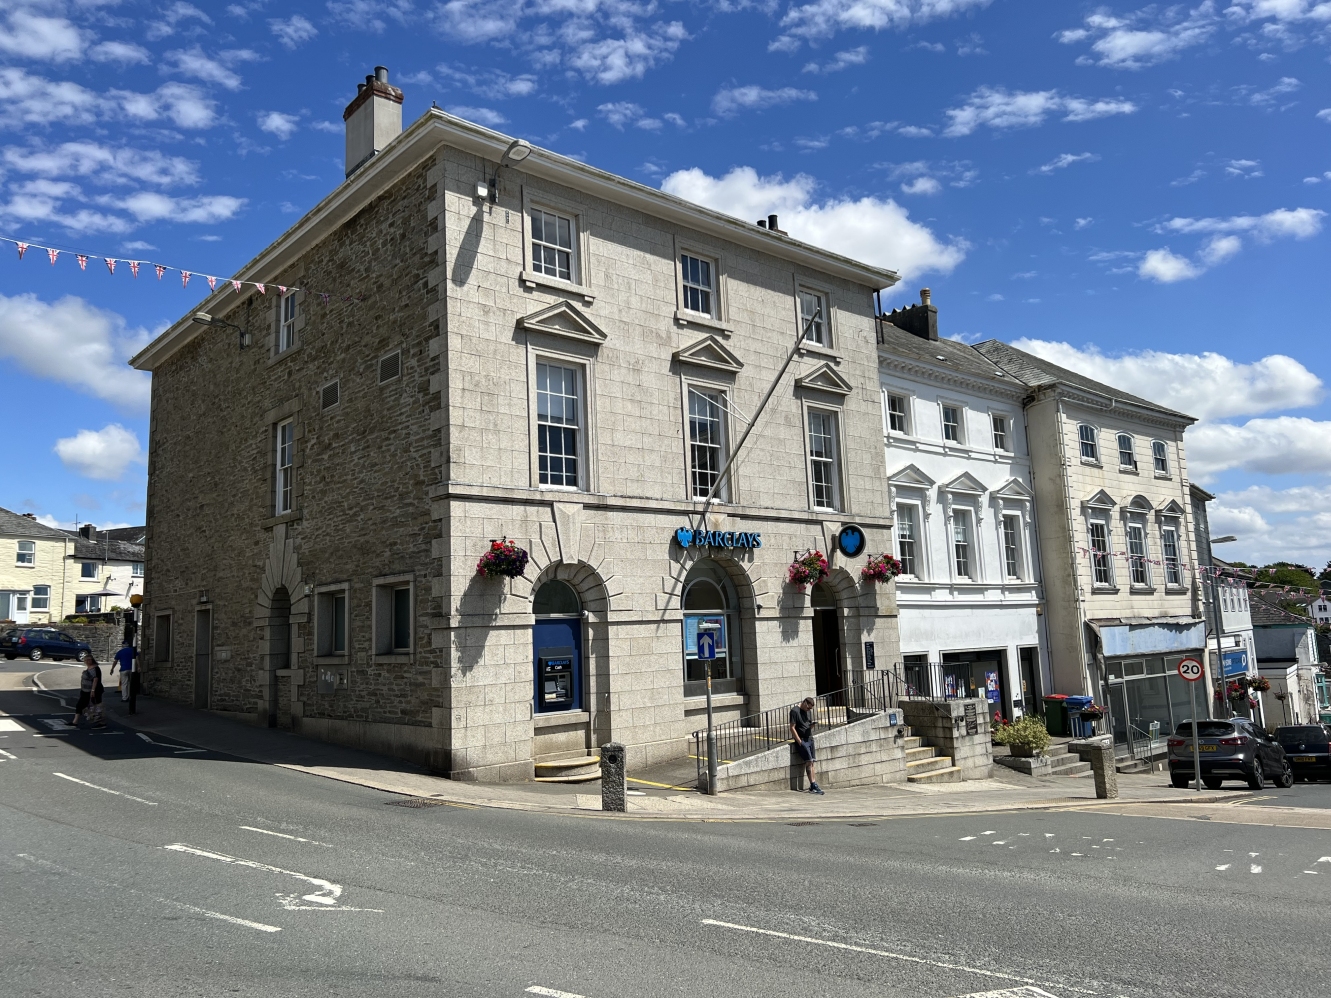 Retail Property (High Street) for rent in Liskeard. From Miller Commercial - Commercial